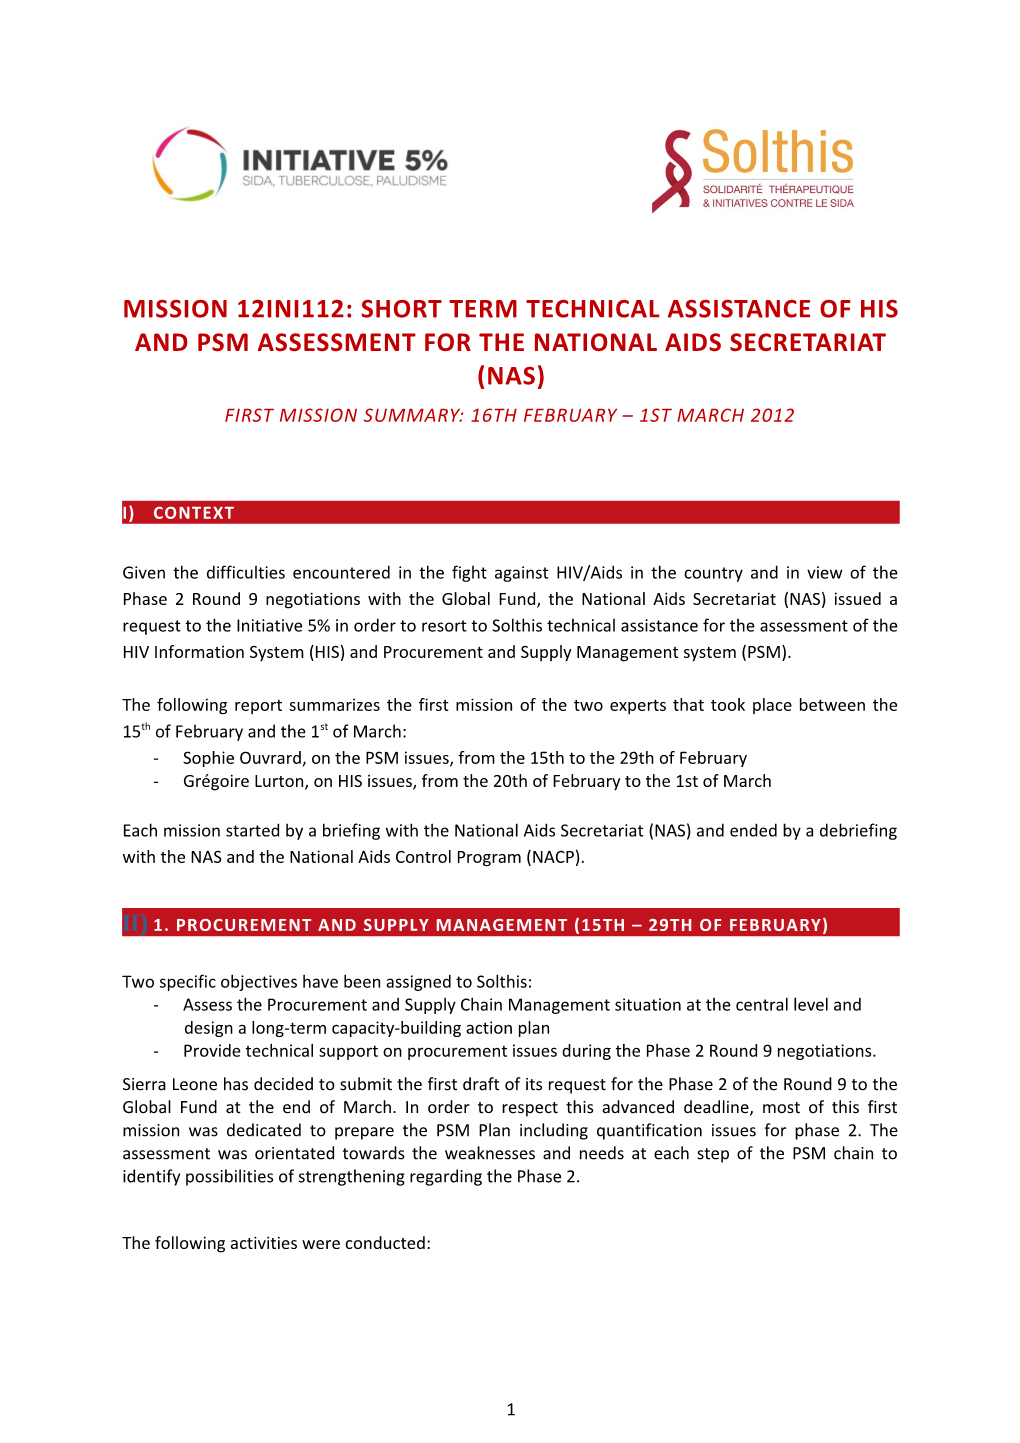 Mission 12INI112: Short Term Technical Assistance of HIS and PSM Assessment for the National